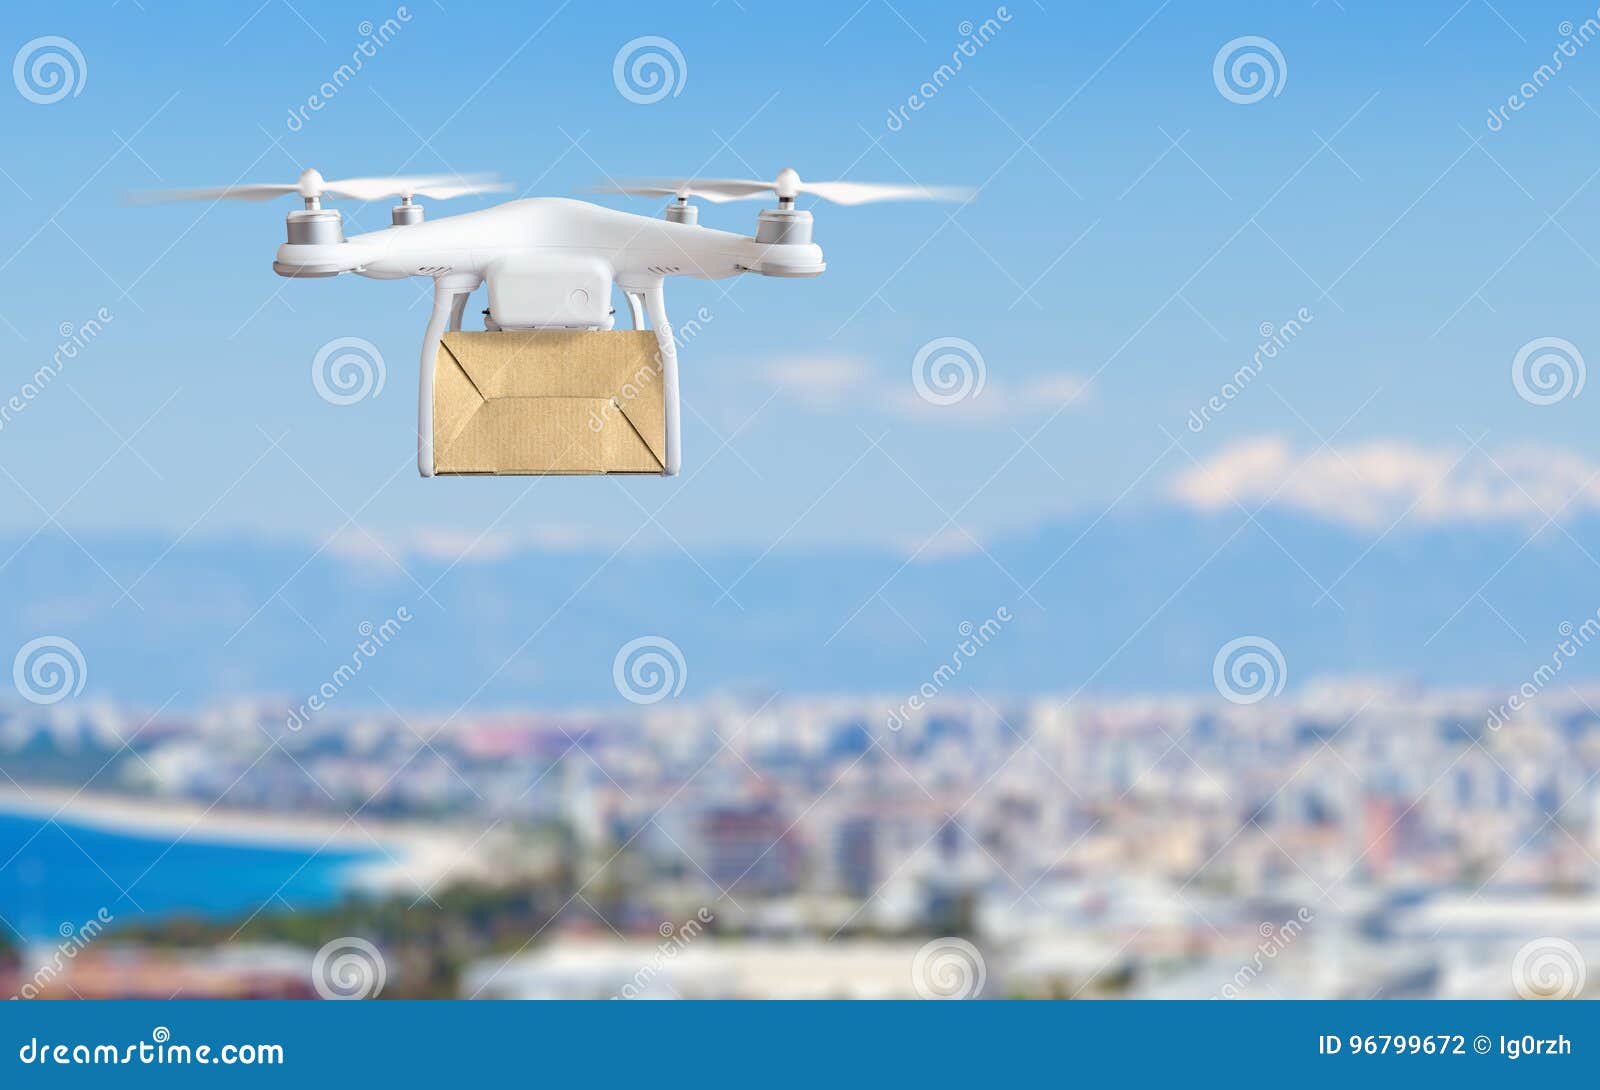 technological shipment innovation - drone fast delivery concept